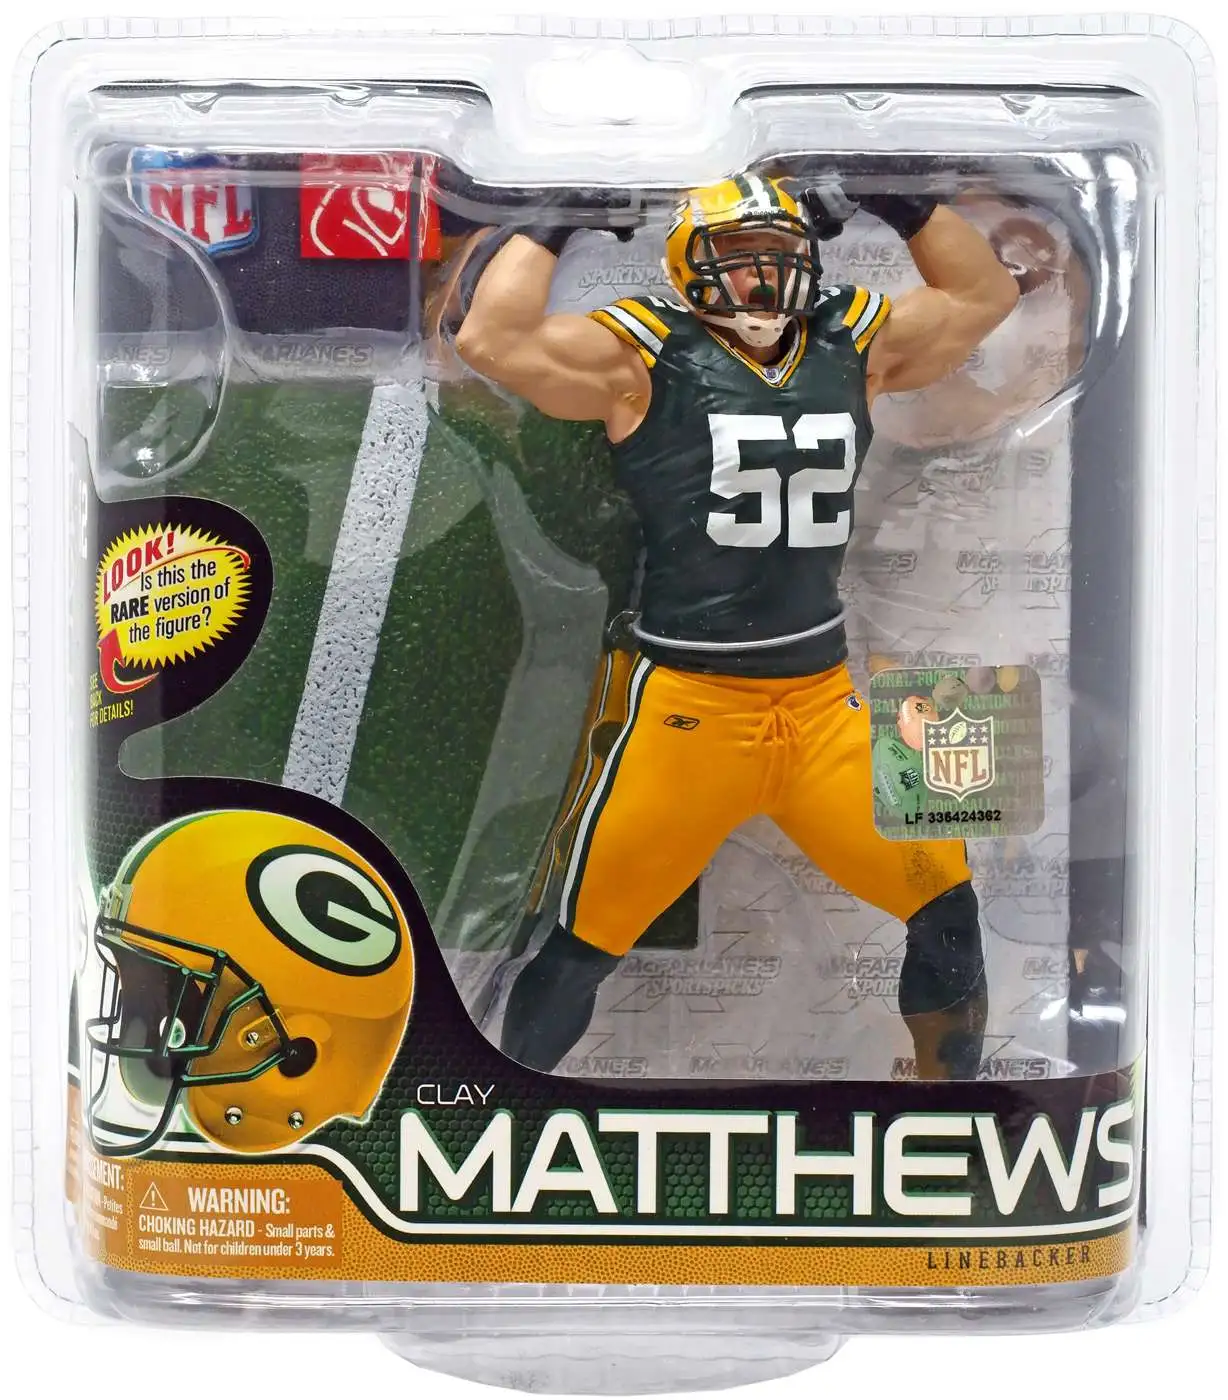 McFarlane Toys NFL Green Bay Packers EA Sports Madden 19 Ultimate Team  Series 1 Aaron Rodgers 7 Action Figure Green Jersey Variant - ToyWiz